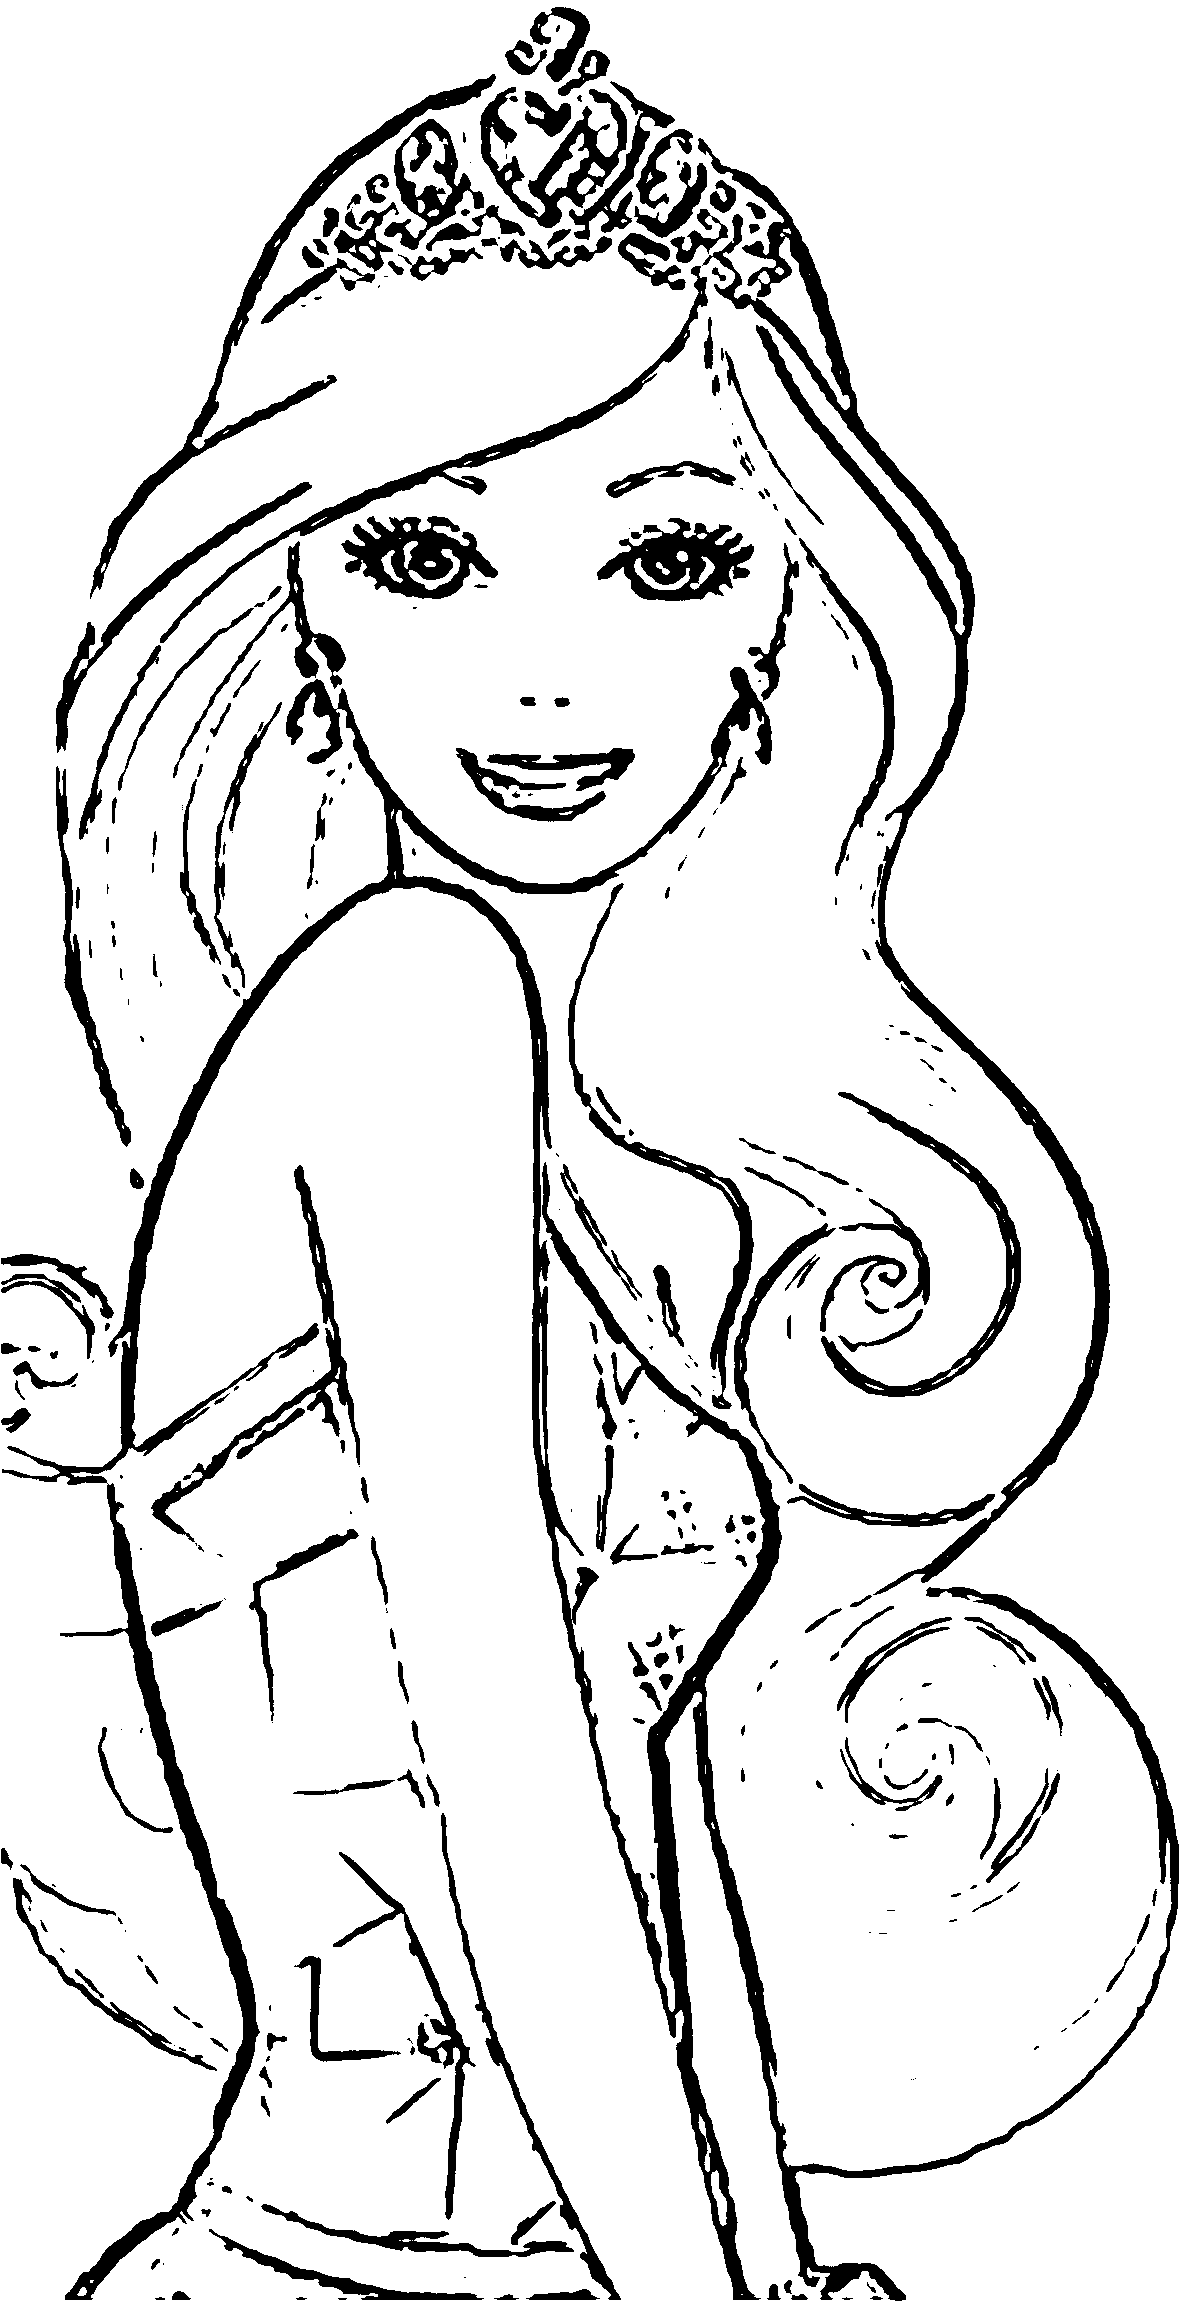 Two Face Coloring Pages Lion Face Coloring Page. Kids Coloring ...